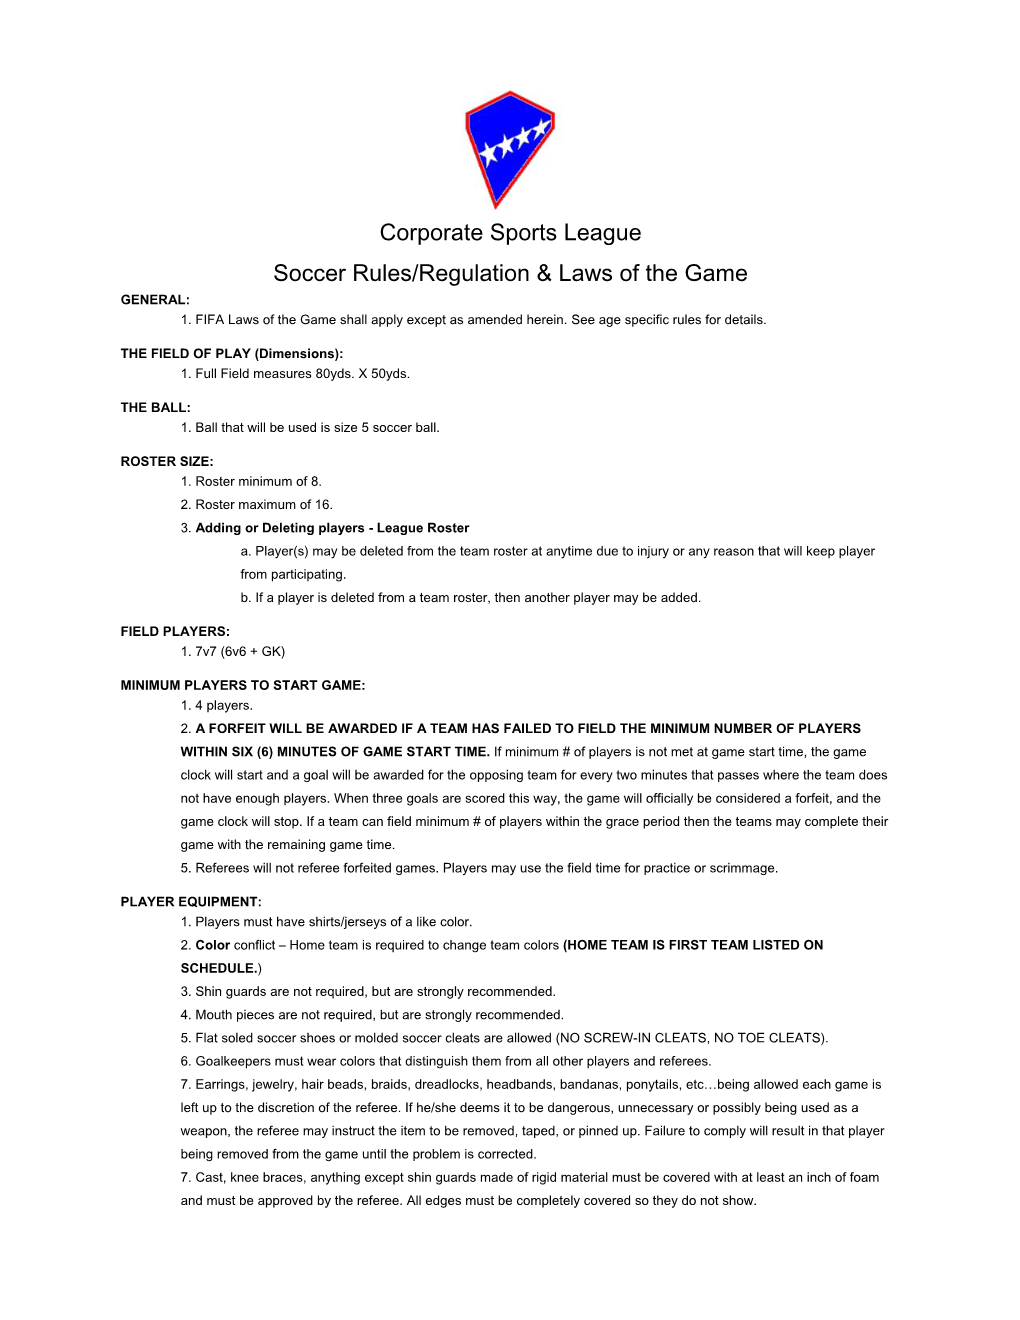 Corporate Sports League Soccer Rules/Regulation & Laws of the Game